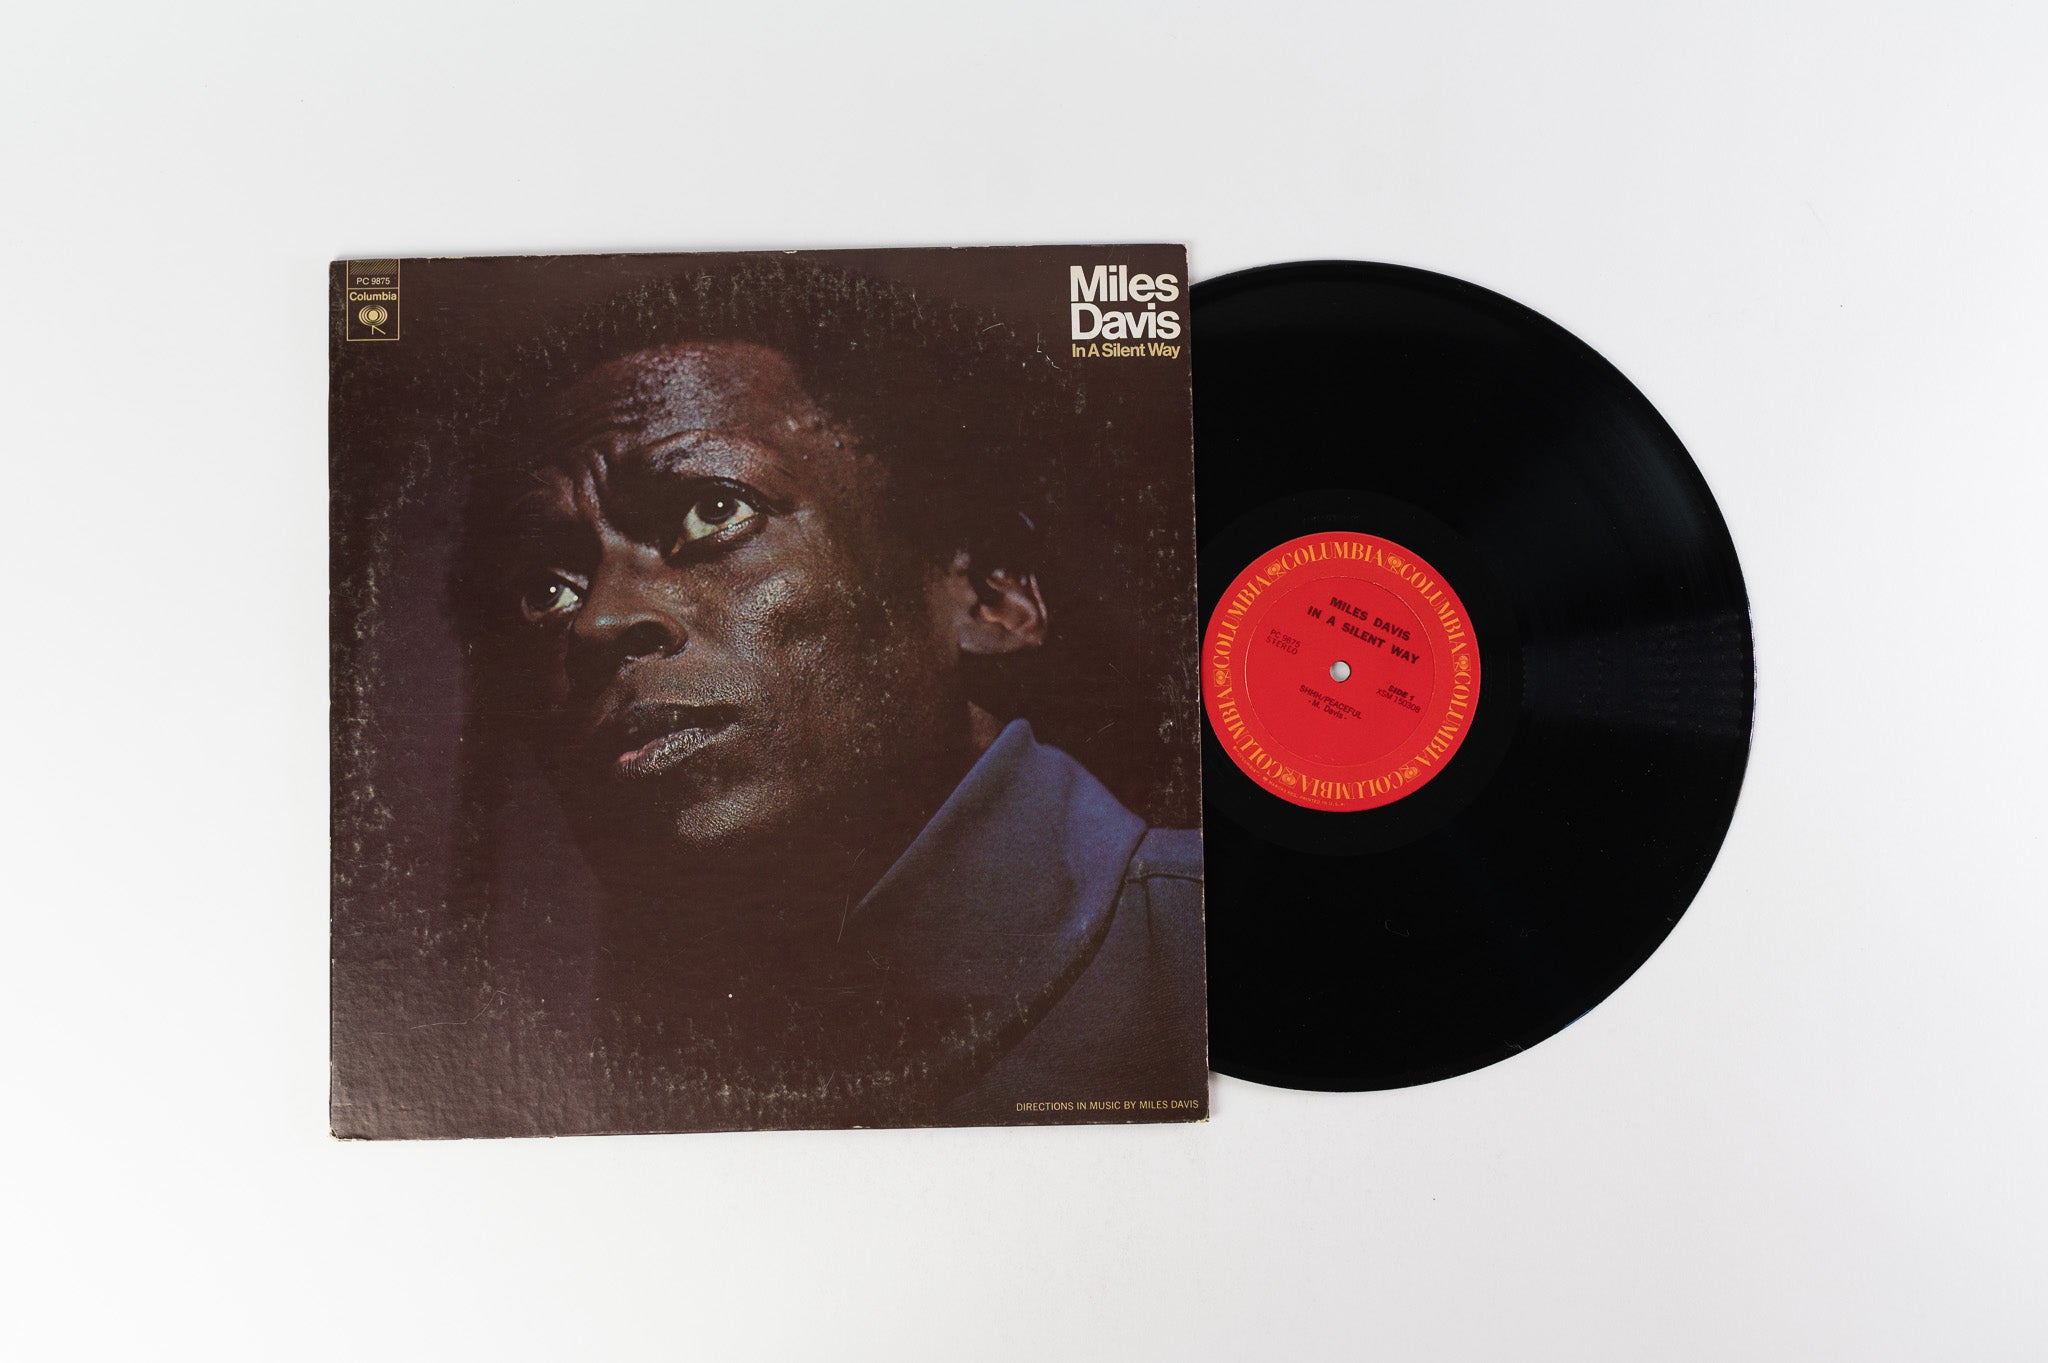 Miles Davis - In A Silent Way on Columbia 1977 reissue